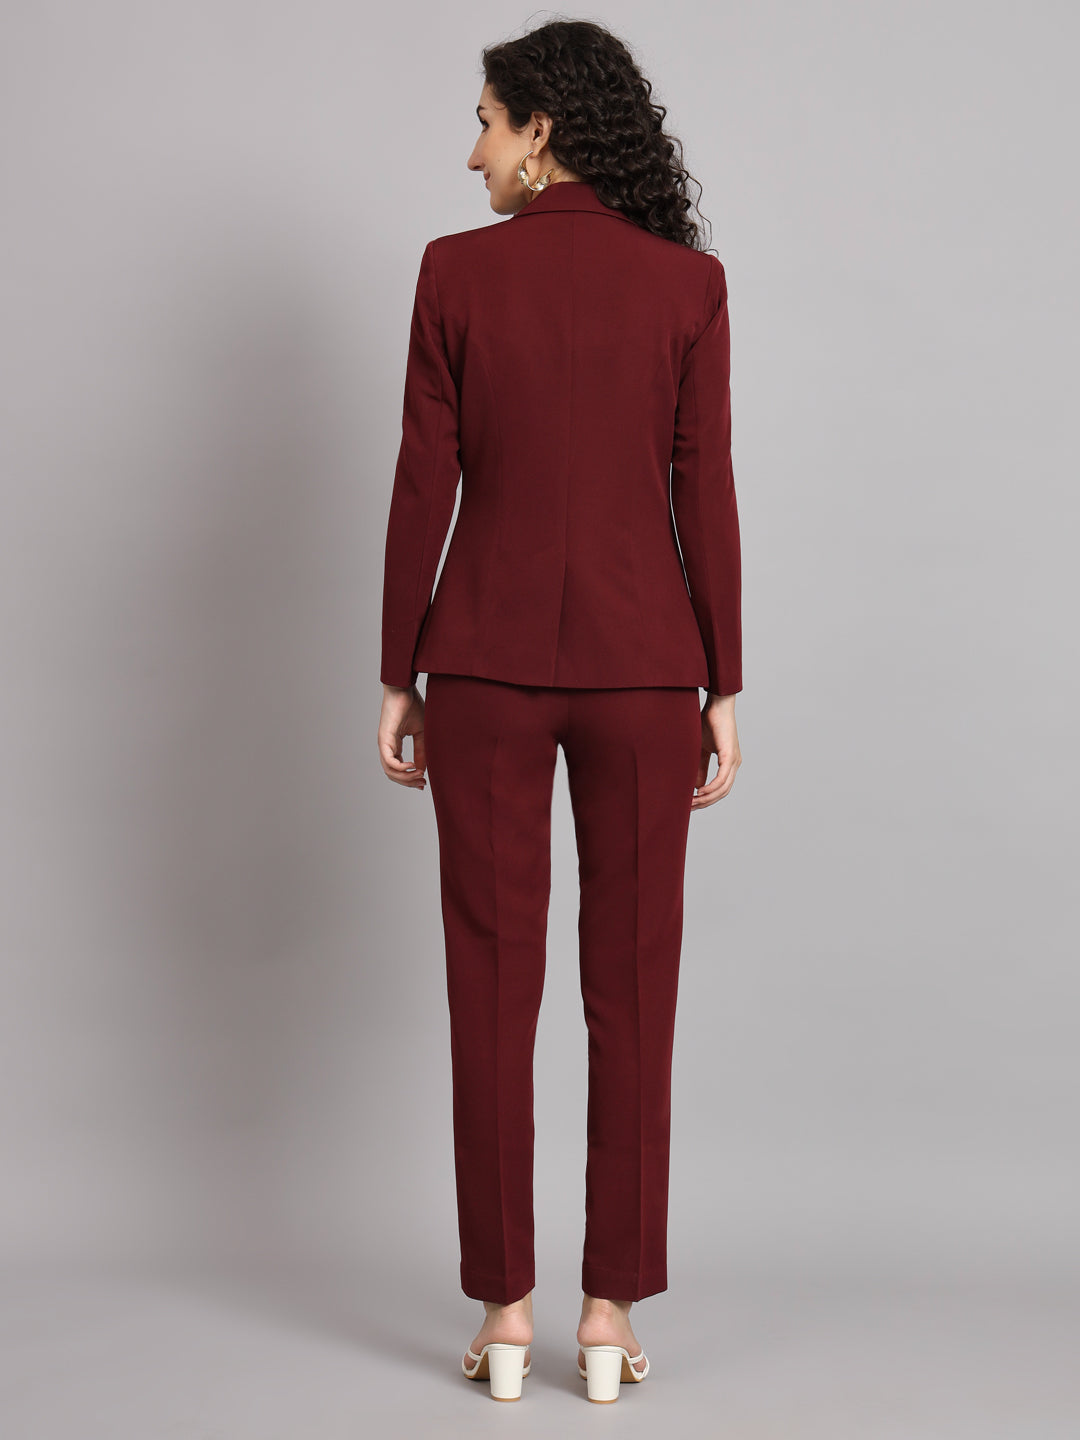 Notched Collar Stretch Pant Suit - Maroon